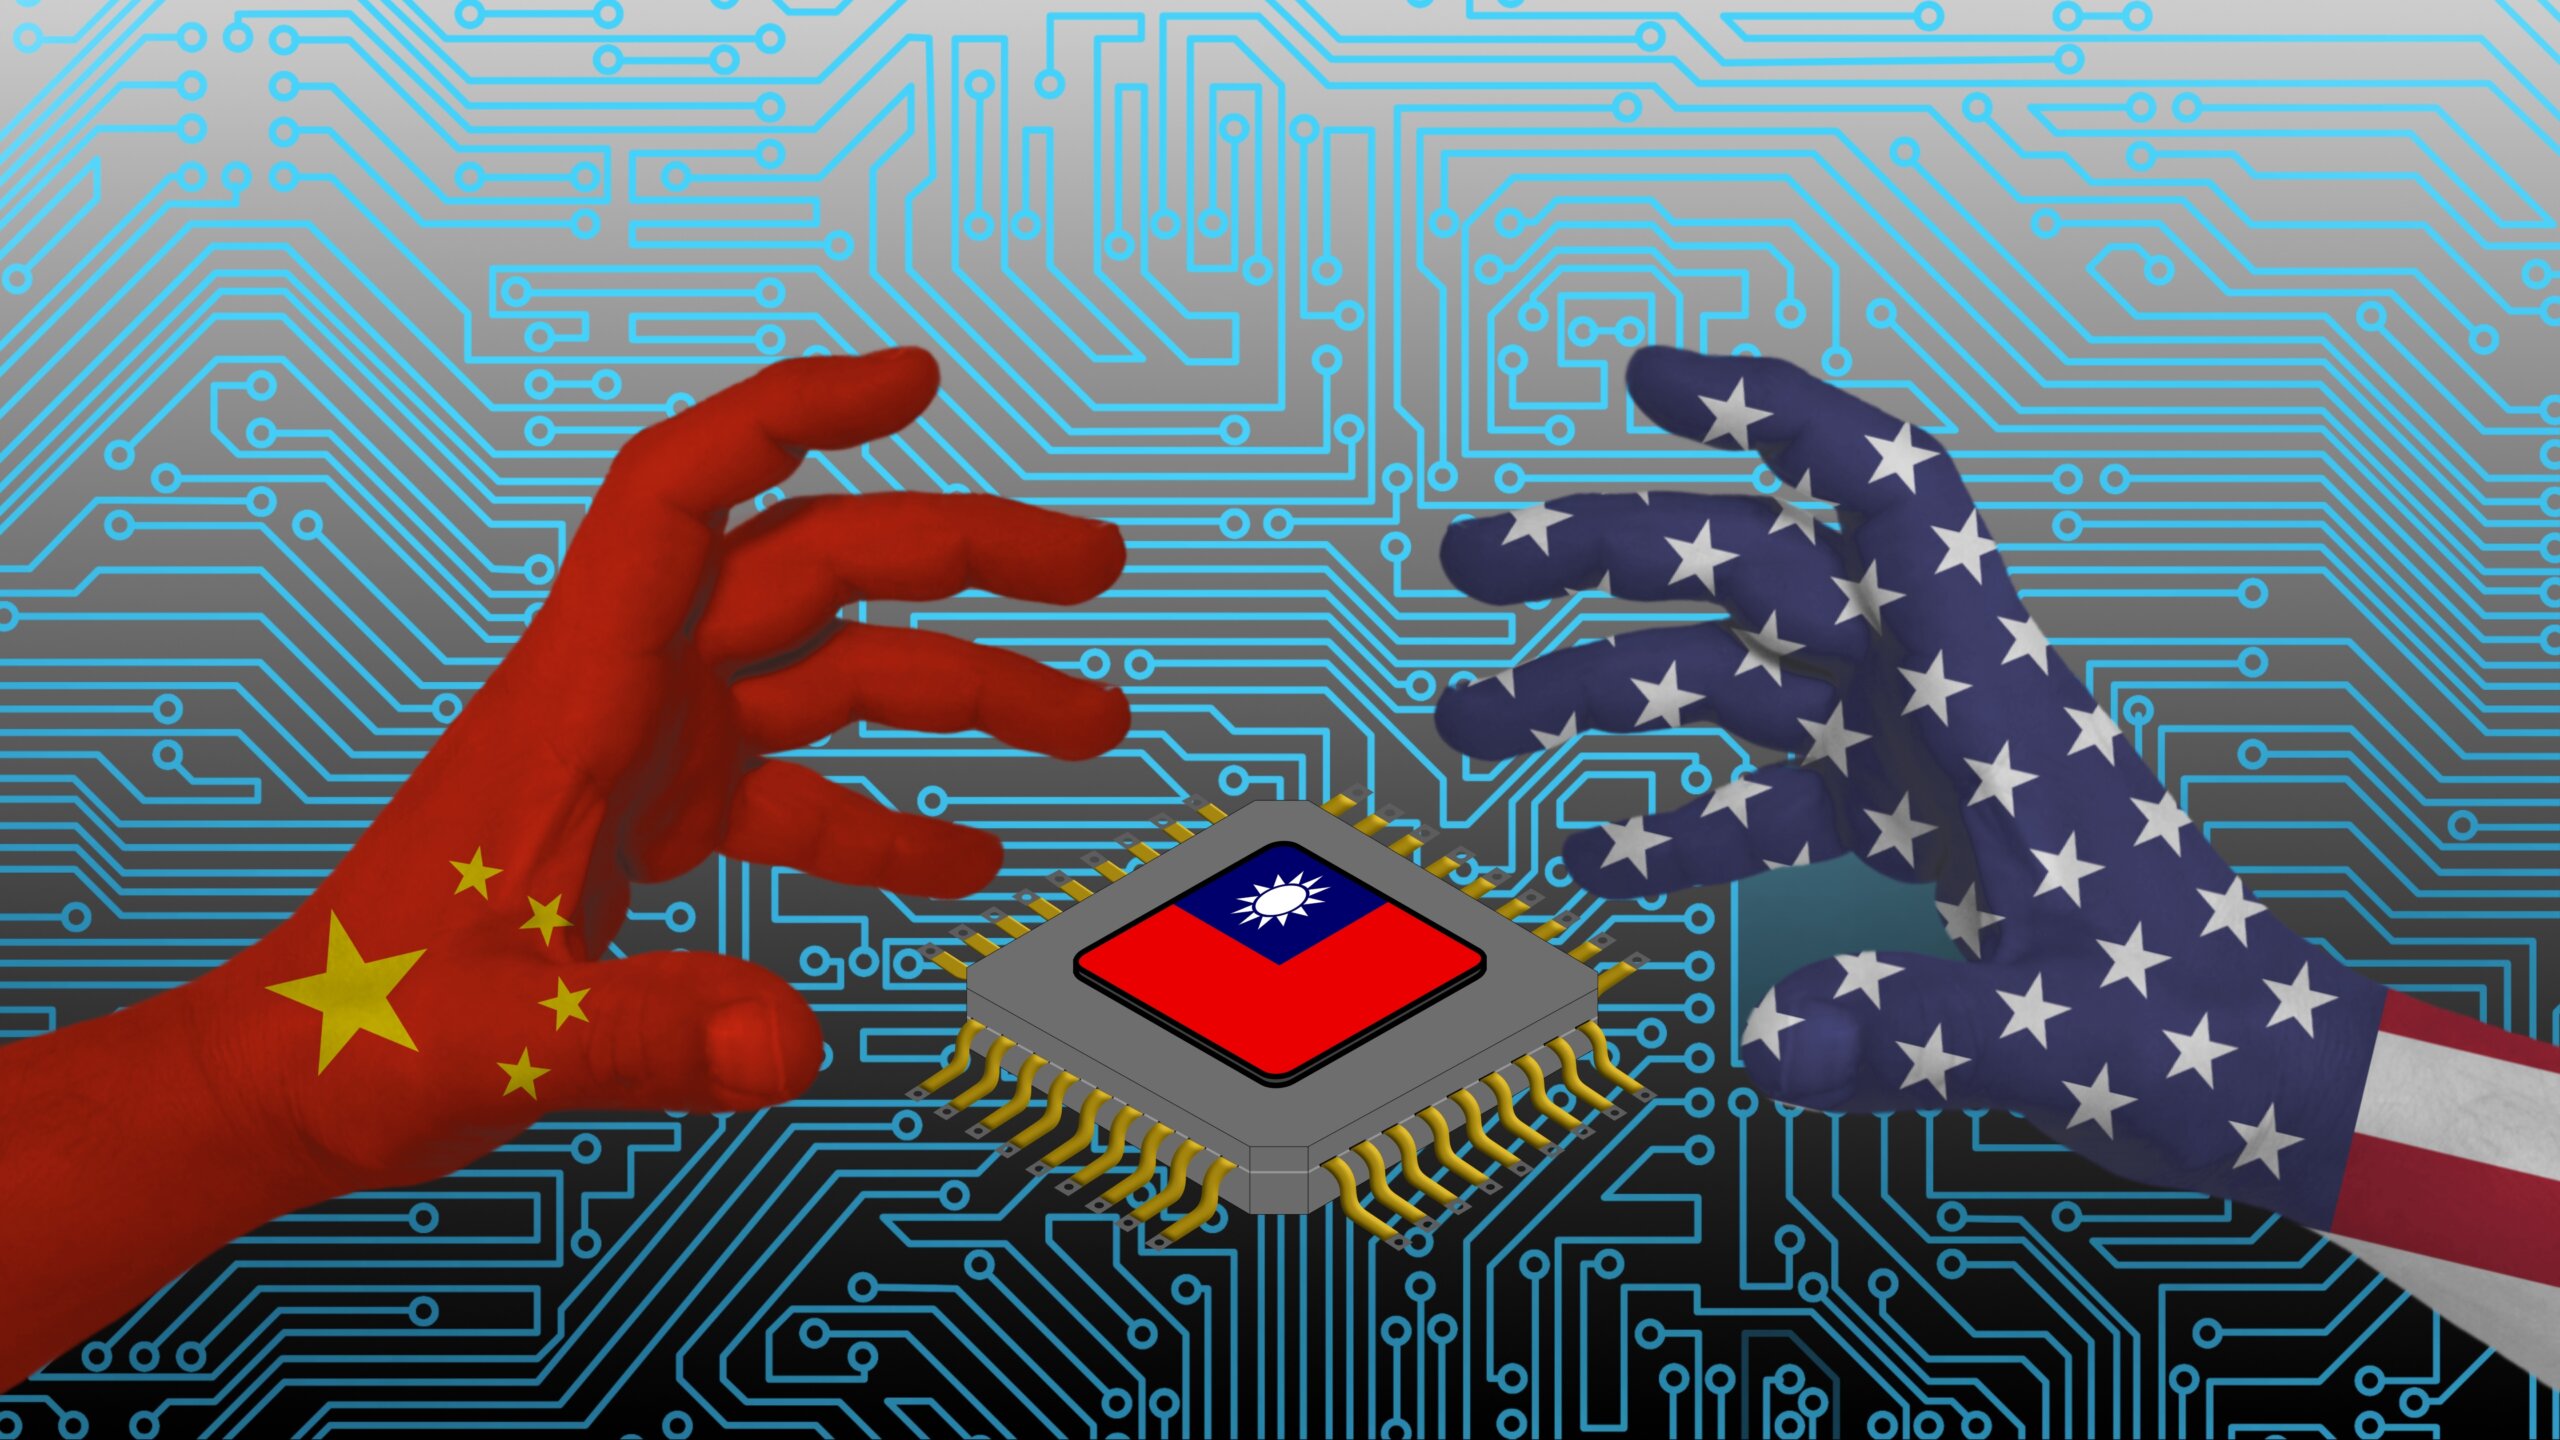 The race to attract tech talent comes as President Xi Jinping emphasizes China's need to achieve self-reliance in semiconductors amid a worsening chip war with the US. Source: Shutterstock